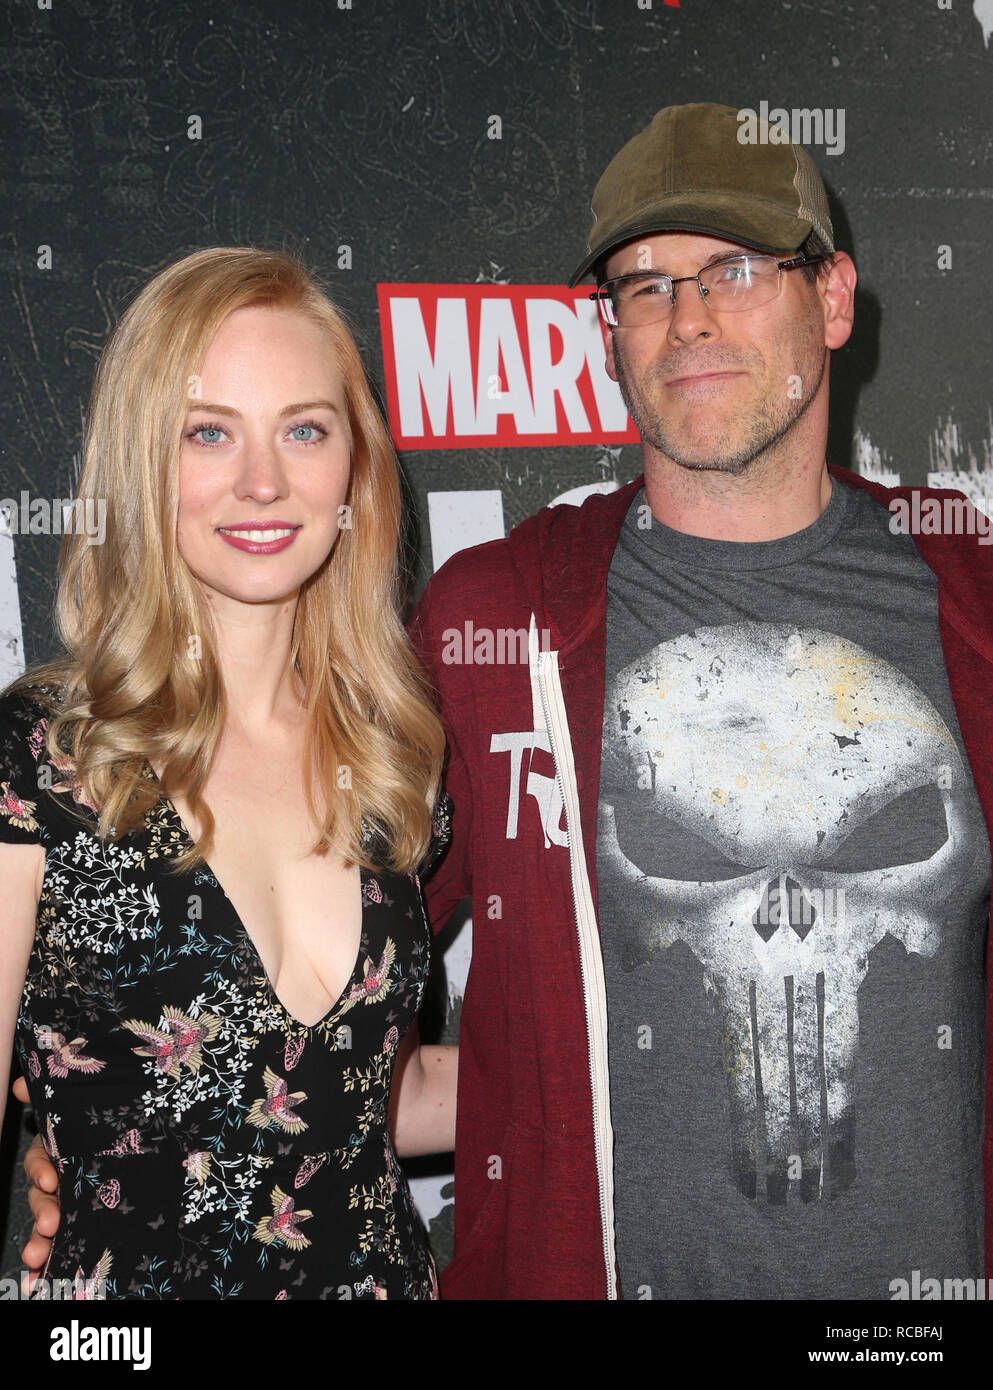 Hollywood, Ca. 14th Jan, 2019. Deborah Ann Woll, E.J. Scott, attends Marvel's "The Punisher" Los Angeles Premiere at ArcLight Hollywood in Hollywood, California on January 14, 2019. Credit: Faye Sadou/Media Punch/Alamy Live News Stock Photo